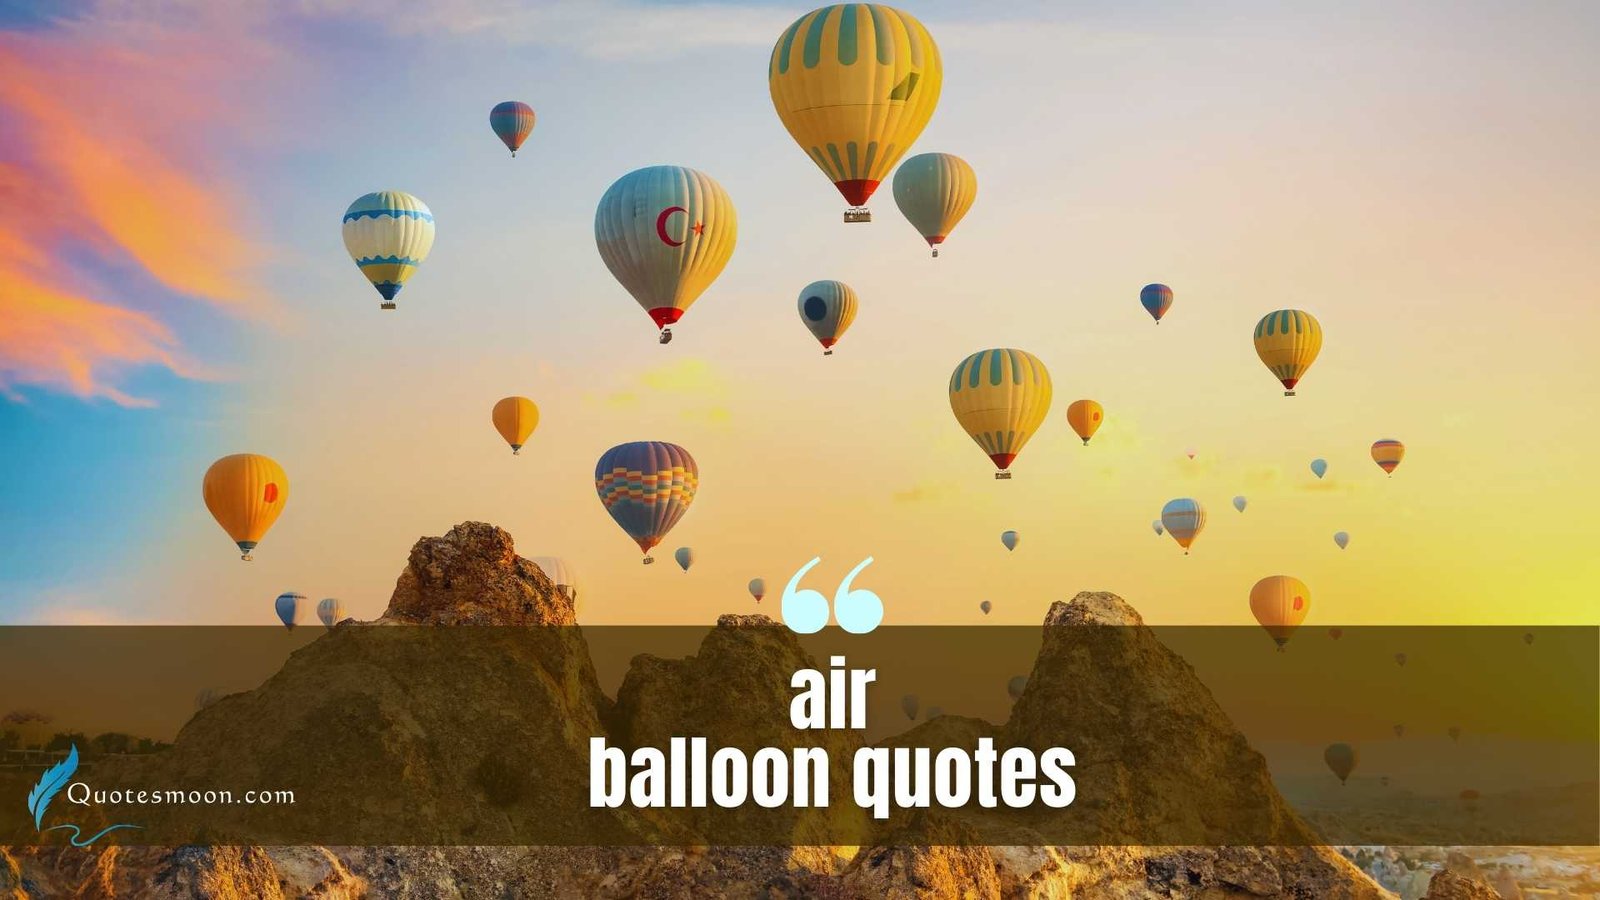 air balloon quotes images